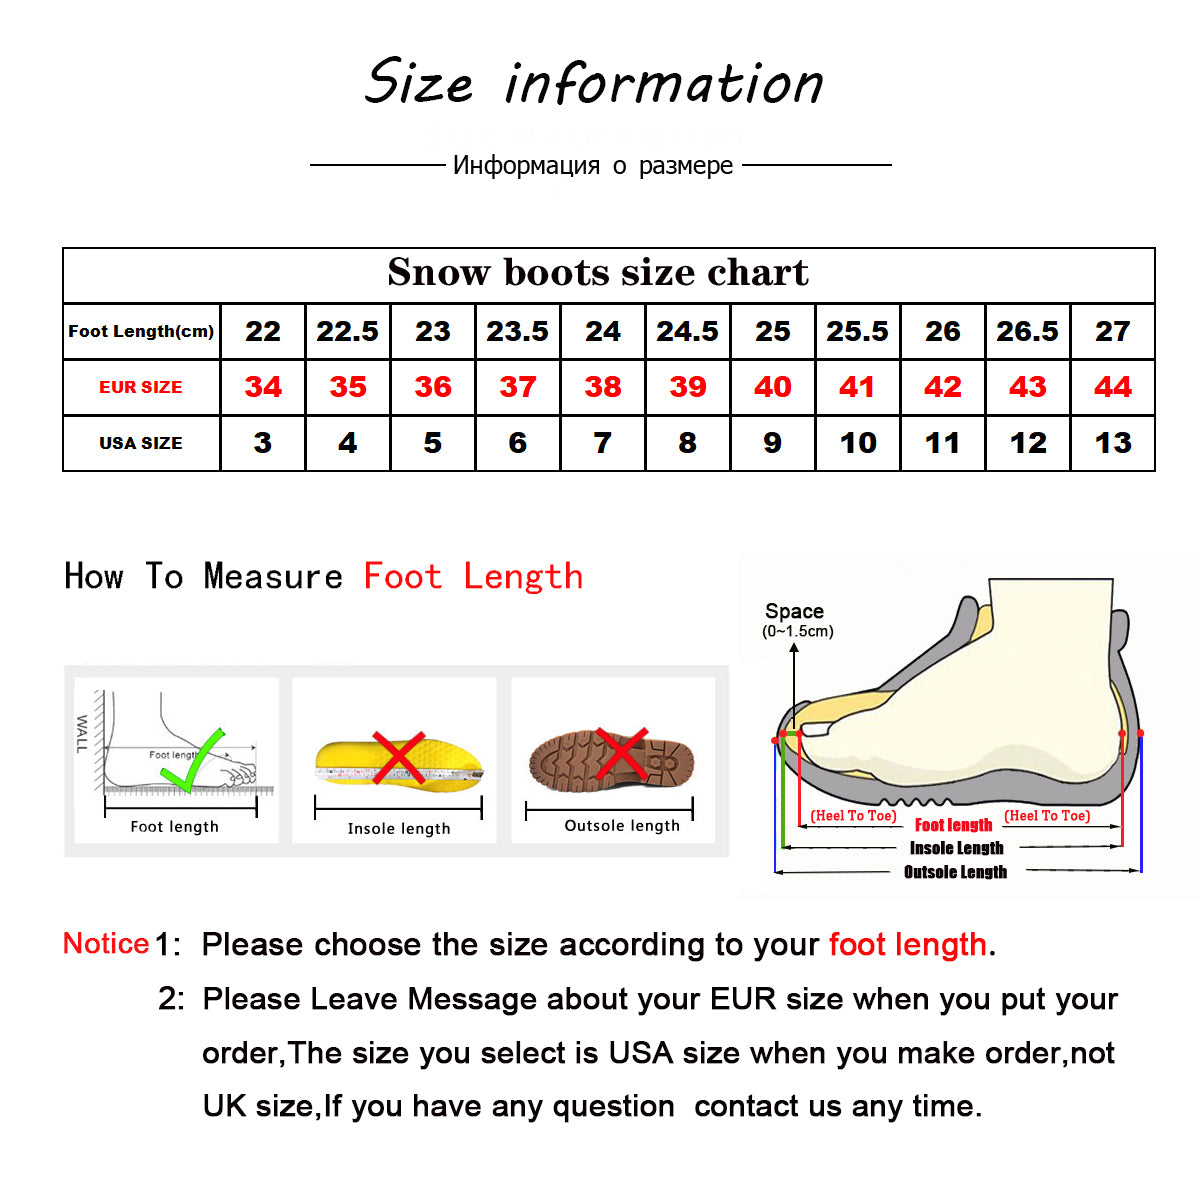 Fashion New Soft Women Ankle Boots Motorcycle Boots Female Autumn Shoes Elegant Woman Ladies Boots 2020 Spring Beige - LiveTrendsX